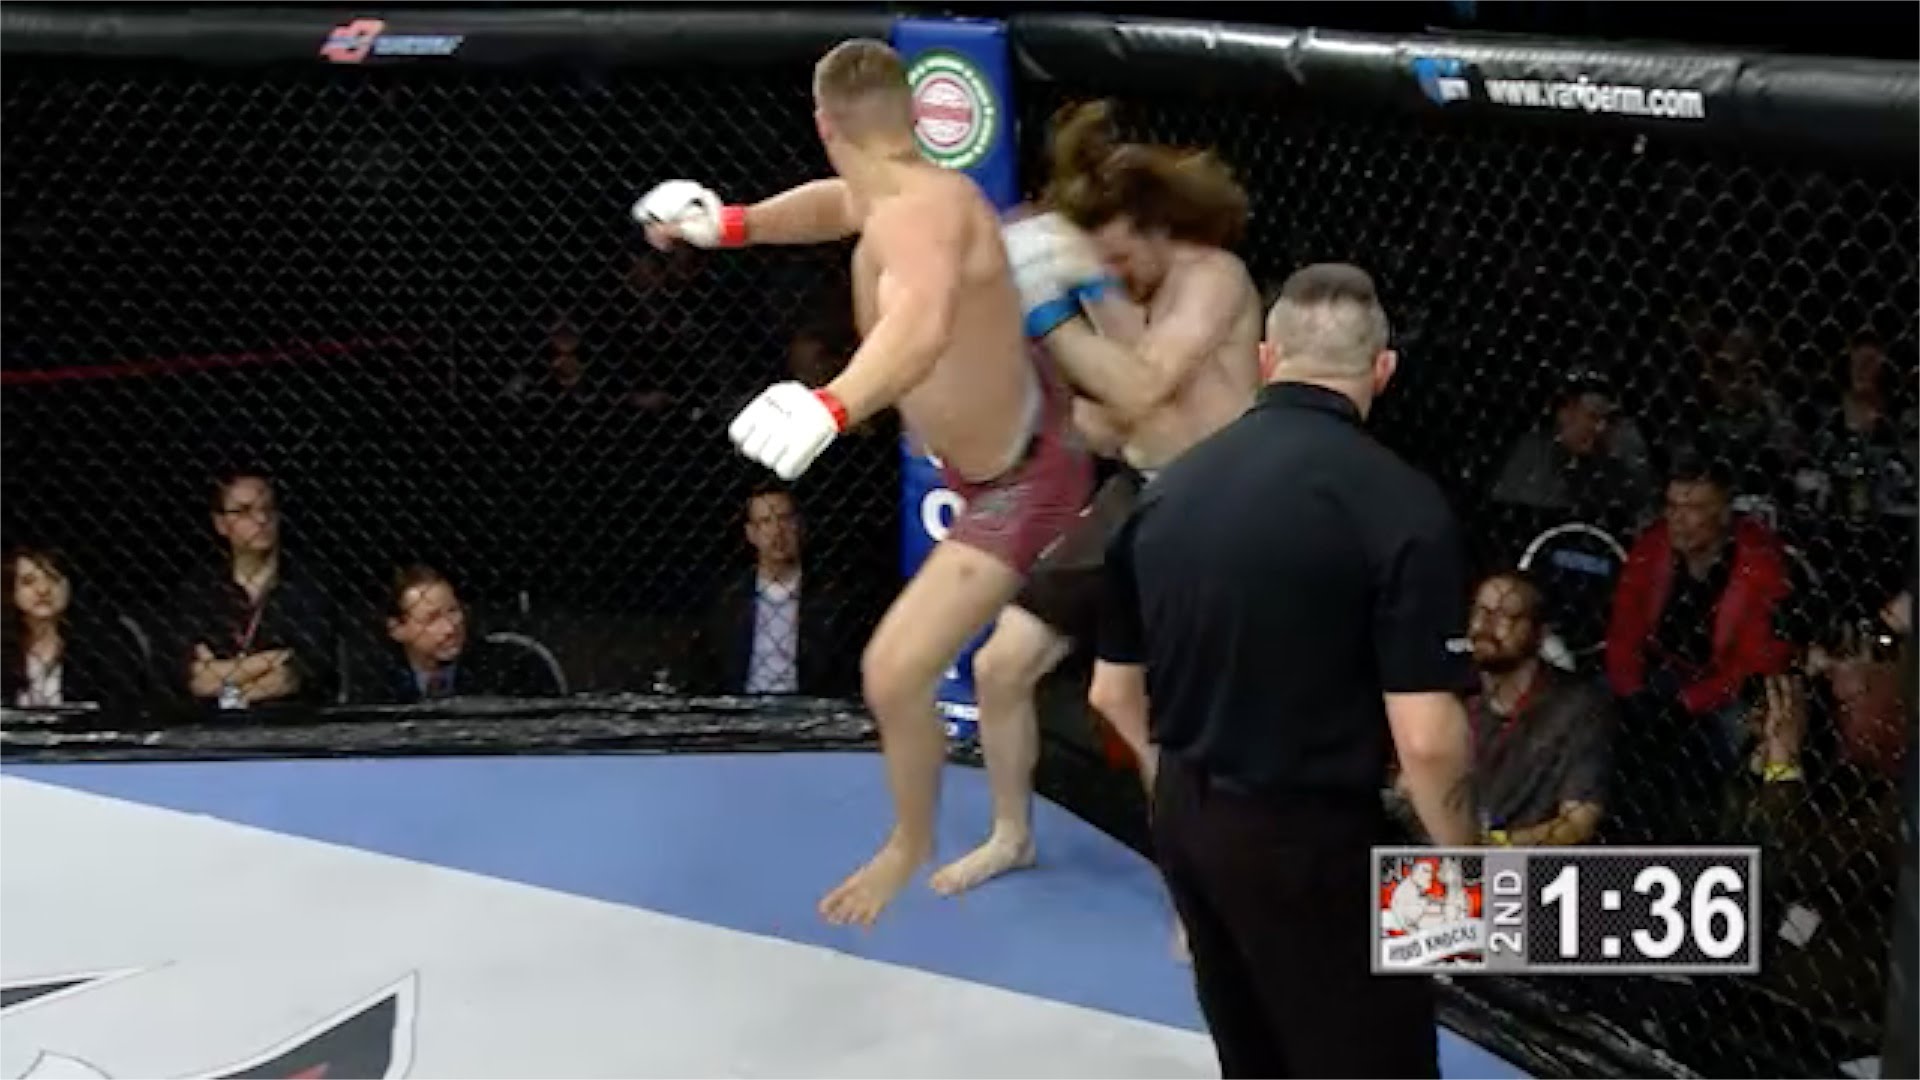 Riley Pequin Bombs Devon Tordoff to the ground Full Fight MMA Video1920 x 1080